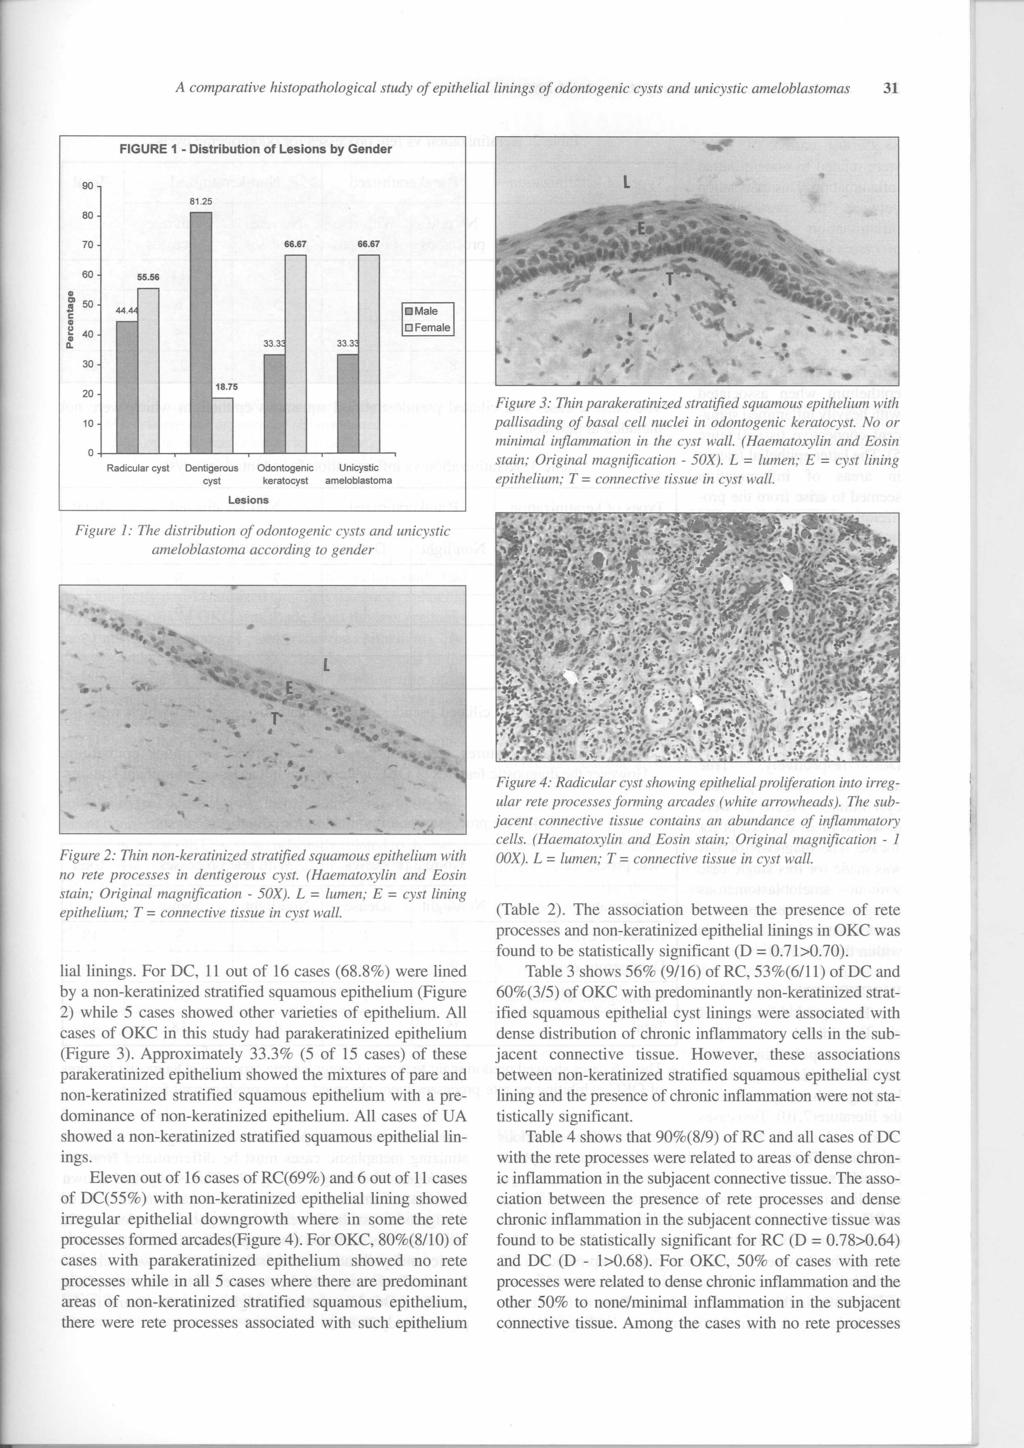 A comparative histopathological study of epithelial linings of odontogenic cysts and unicystic ameloblastomas 31 FIGURE 1 - Distribution of lesions by Gender 90 l 80 81.25 70 66.67 66.67 60 55.